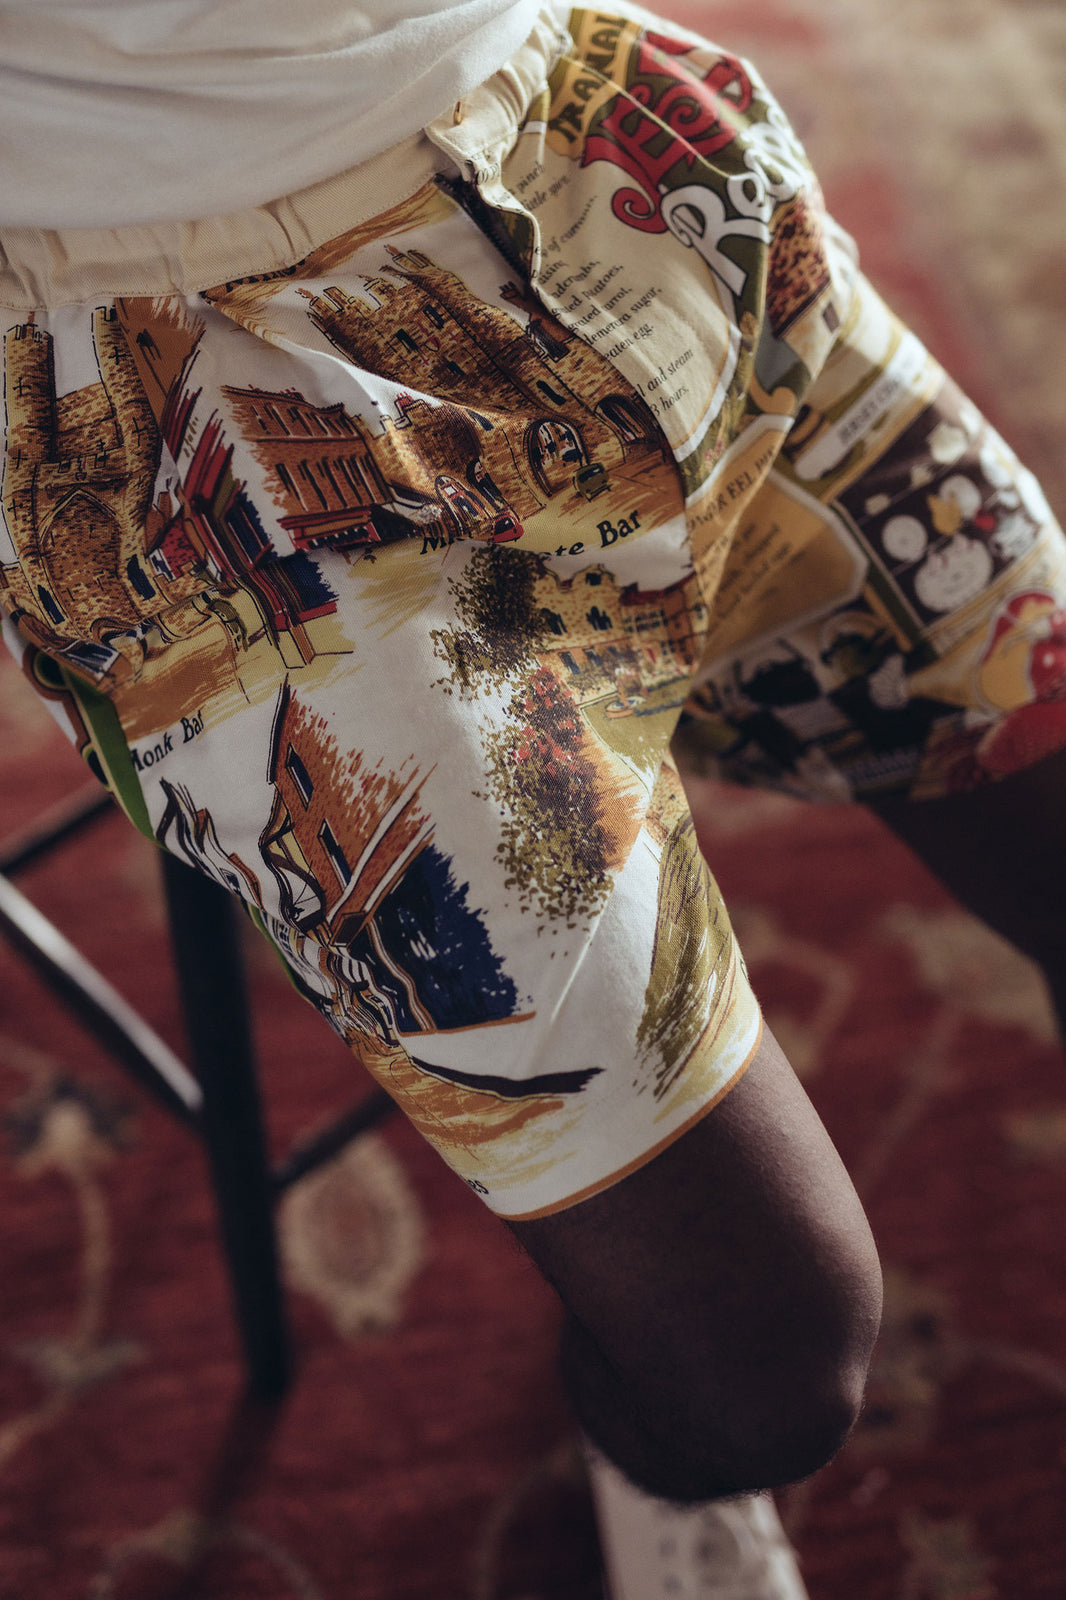 BKc x Life of Kings Canvas Printed Cotton Shorts